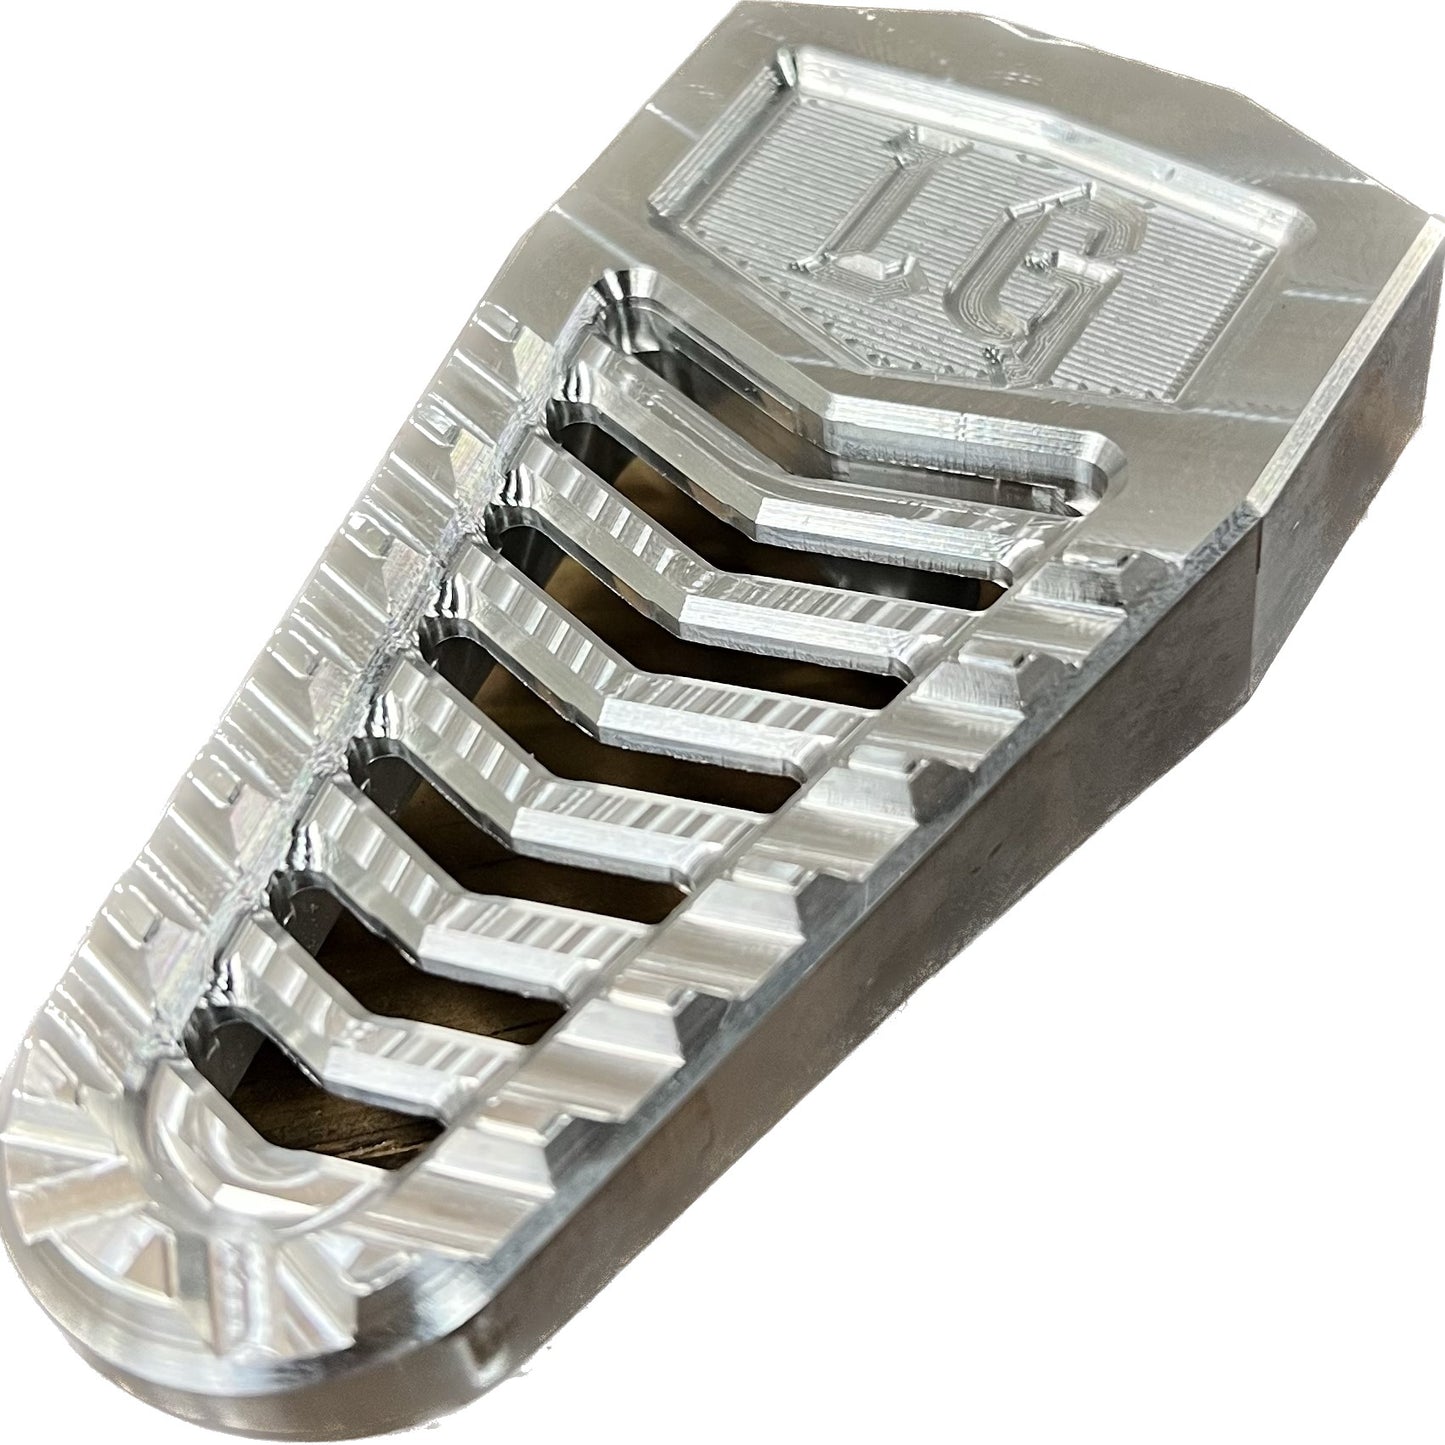 LG High End Foot pegs